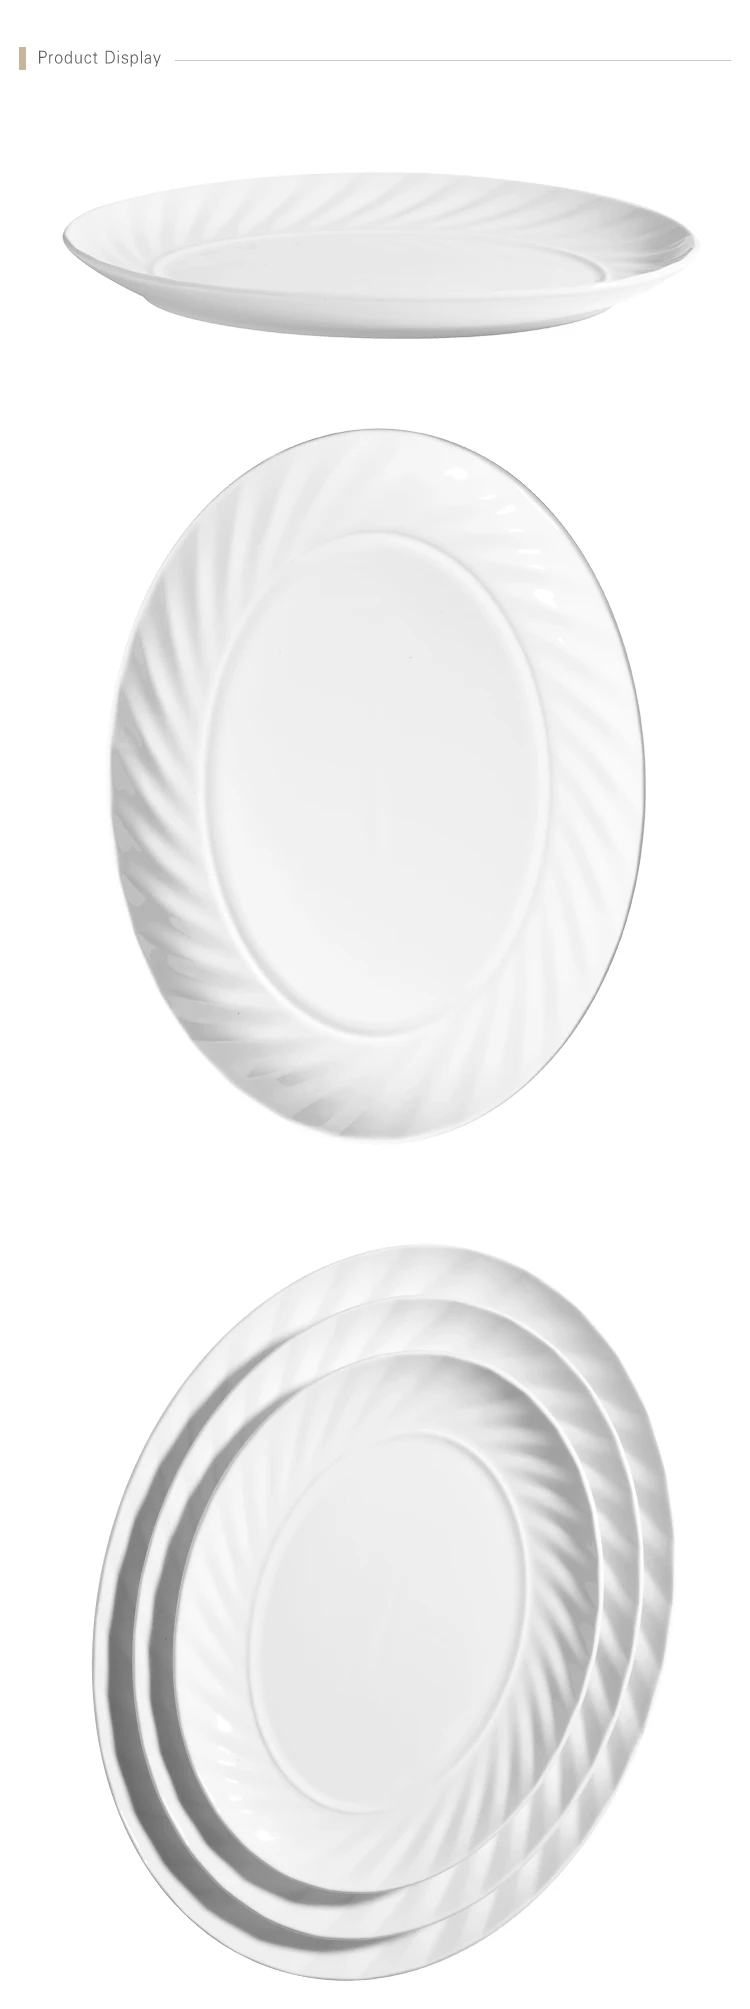 Qatar Hotel Oval Plate 12 Inch Serving Plate Wholesale Dinner Plates